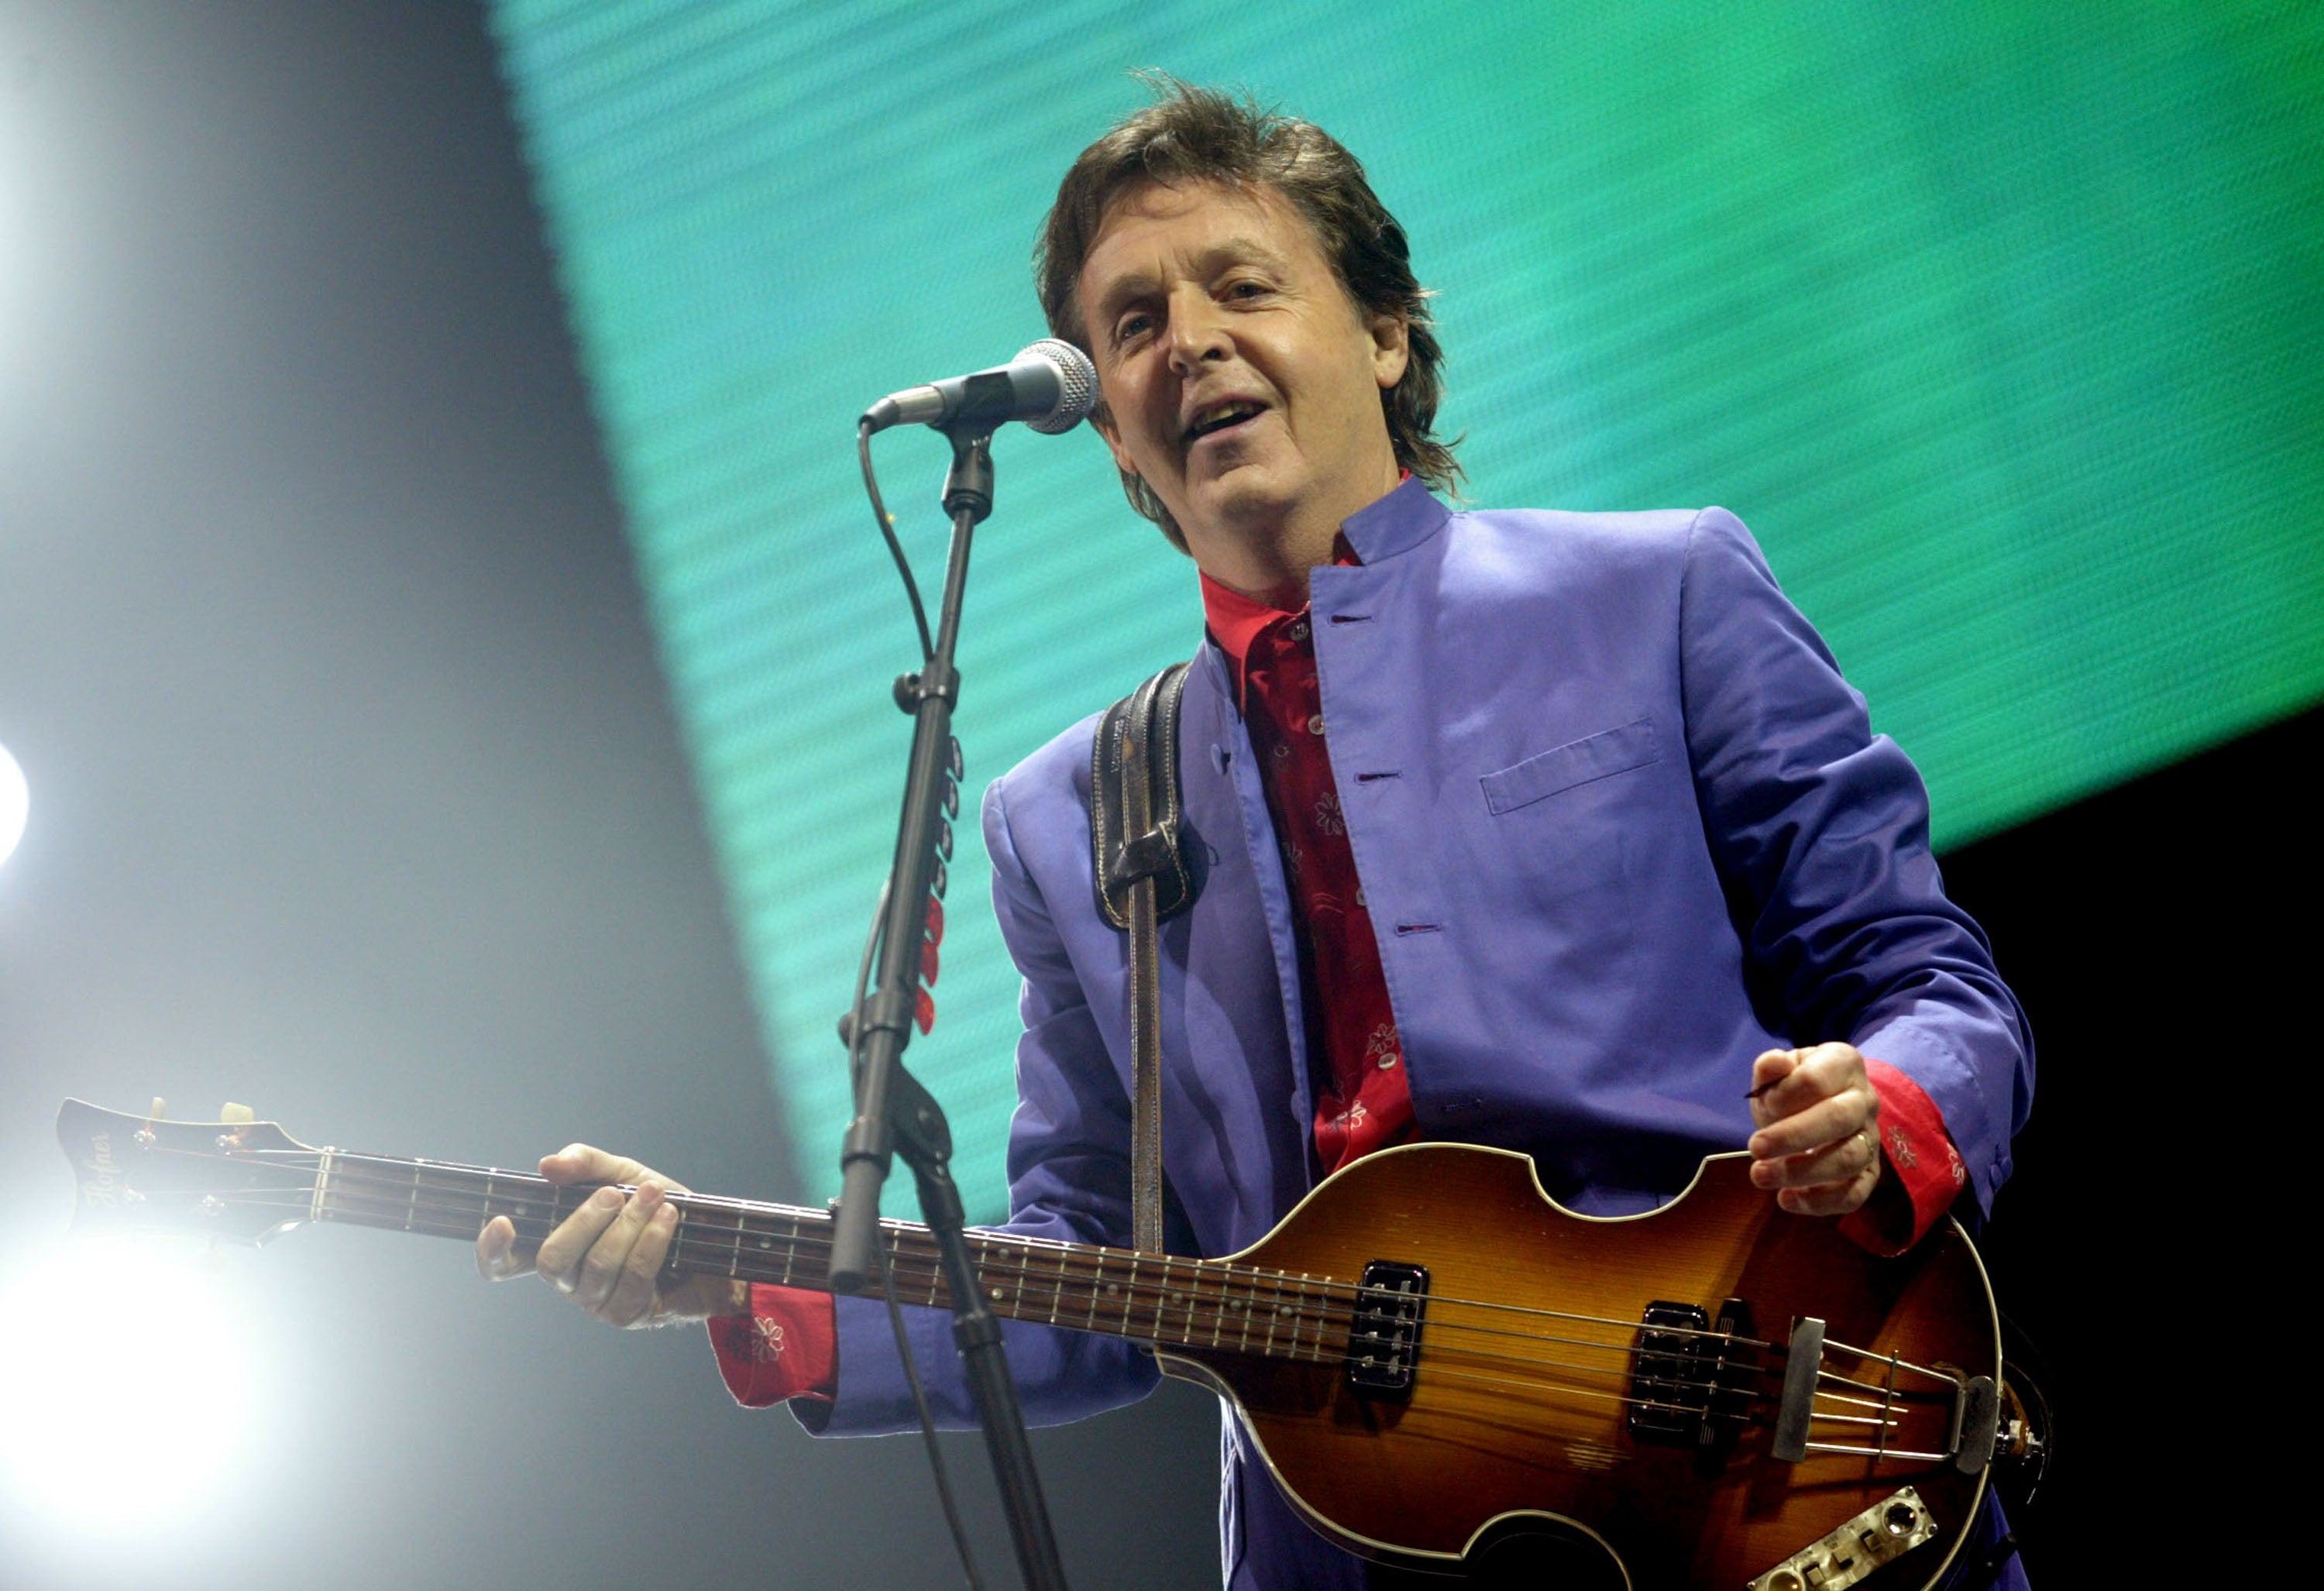 Paul McCartney performs on the Pyramid stage in 2004